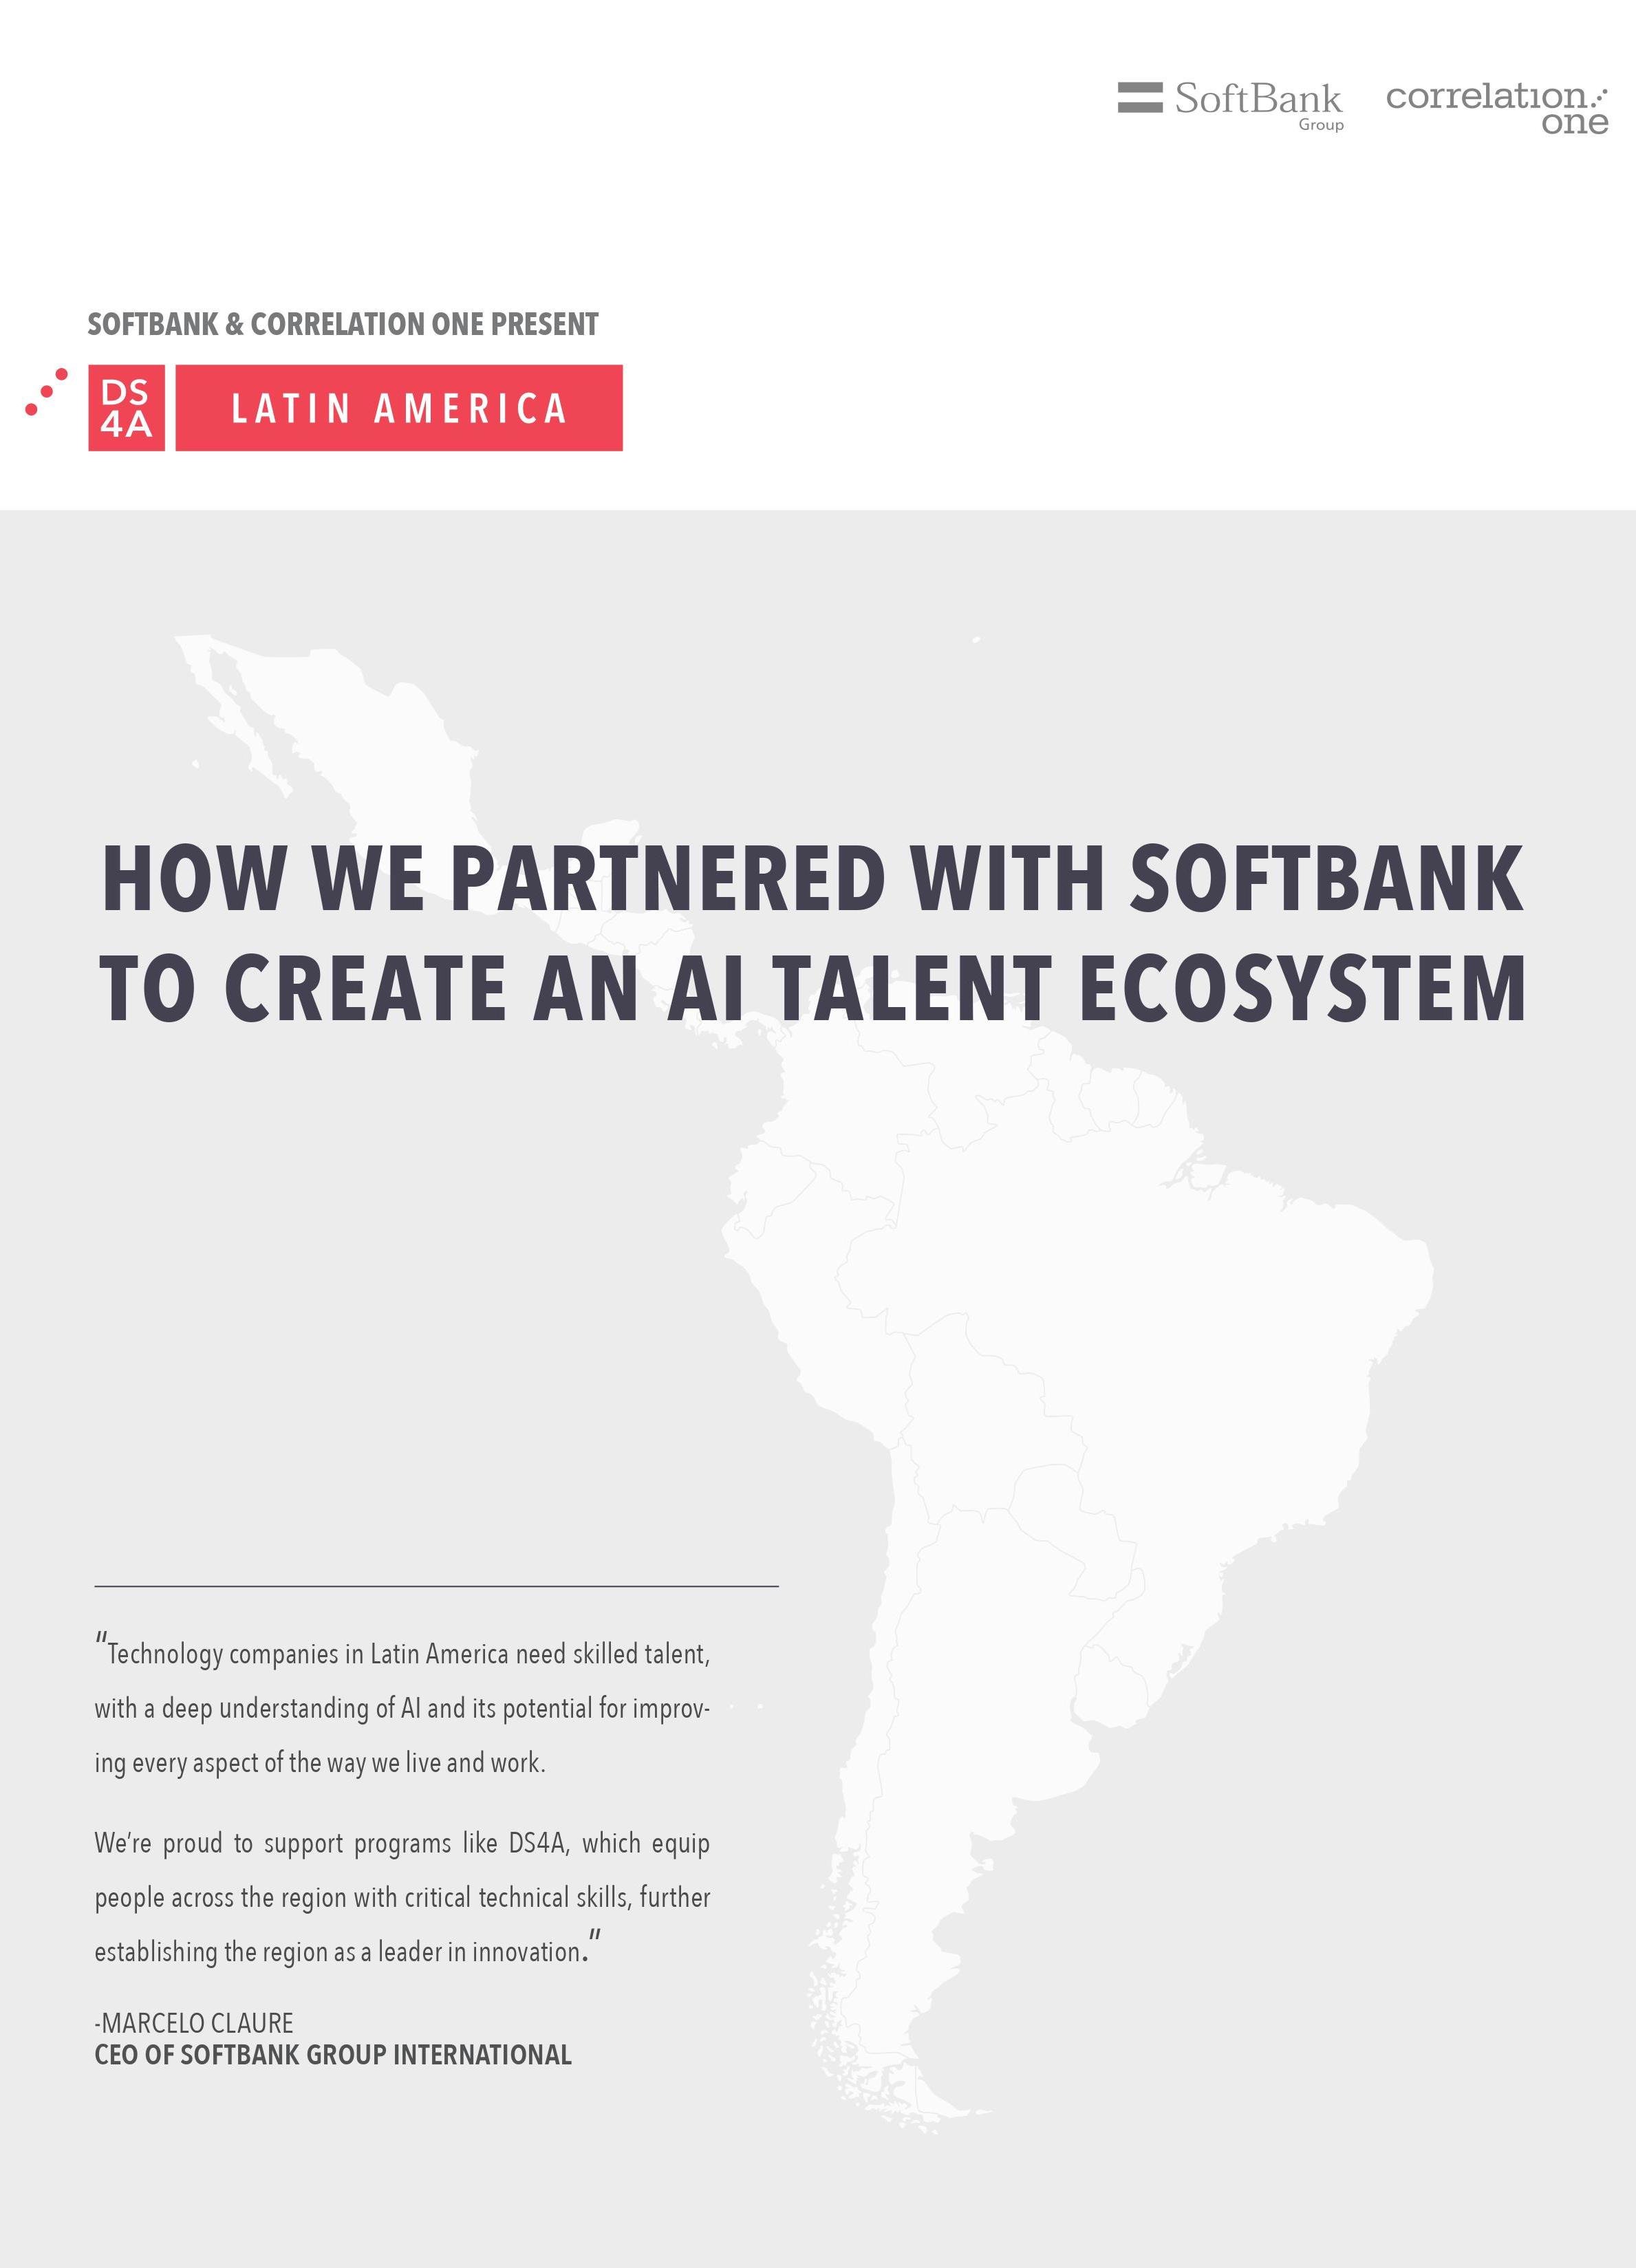 Diversity in Data Science: How Softbank Partnered With Correlation One to Create An AI Talent Ecosystem in Latin America